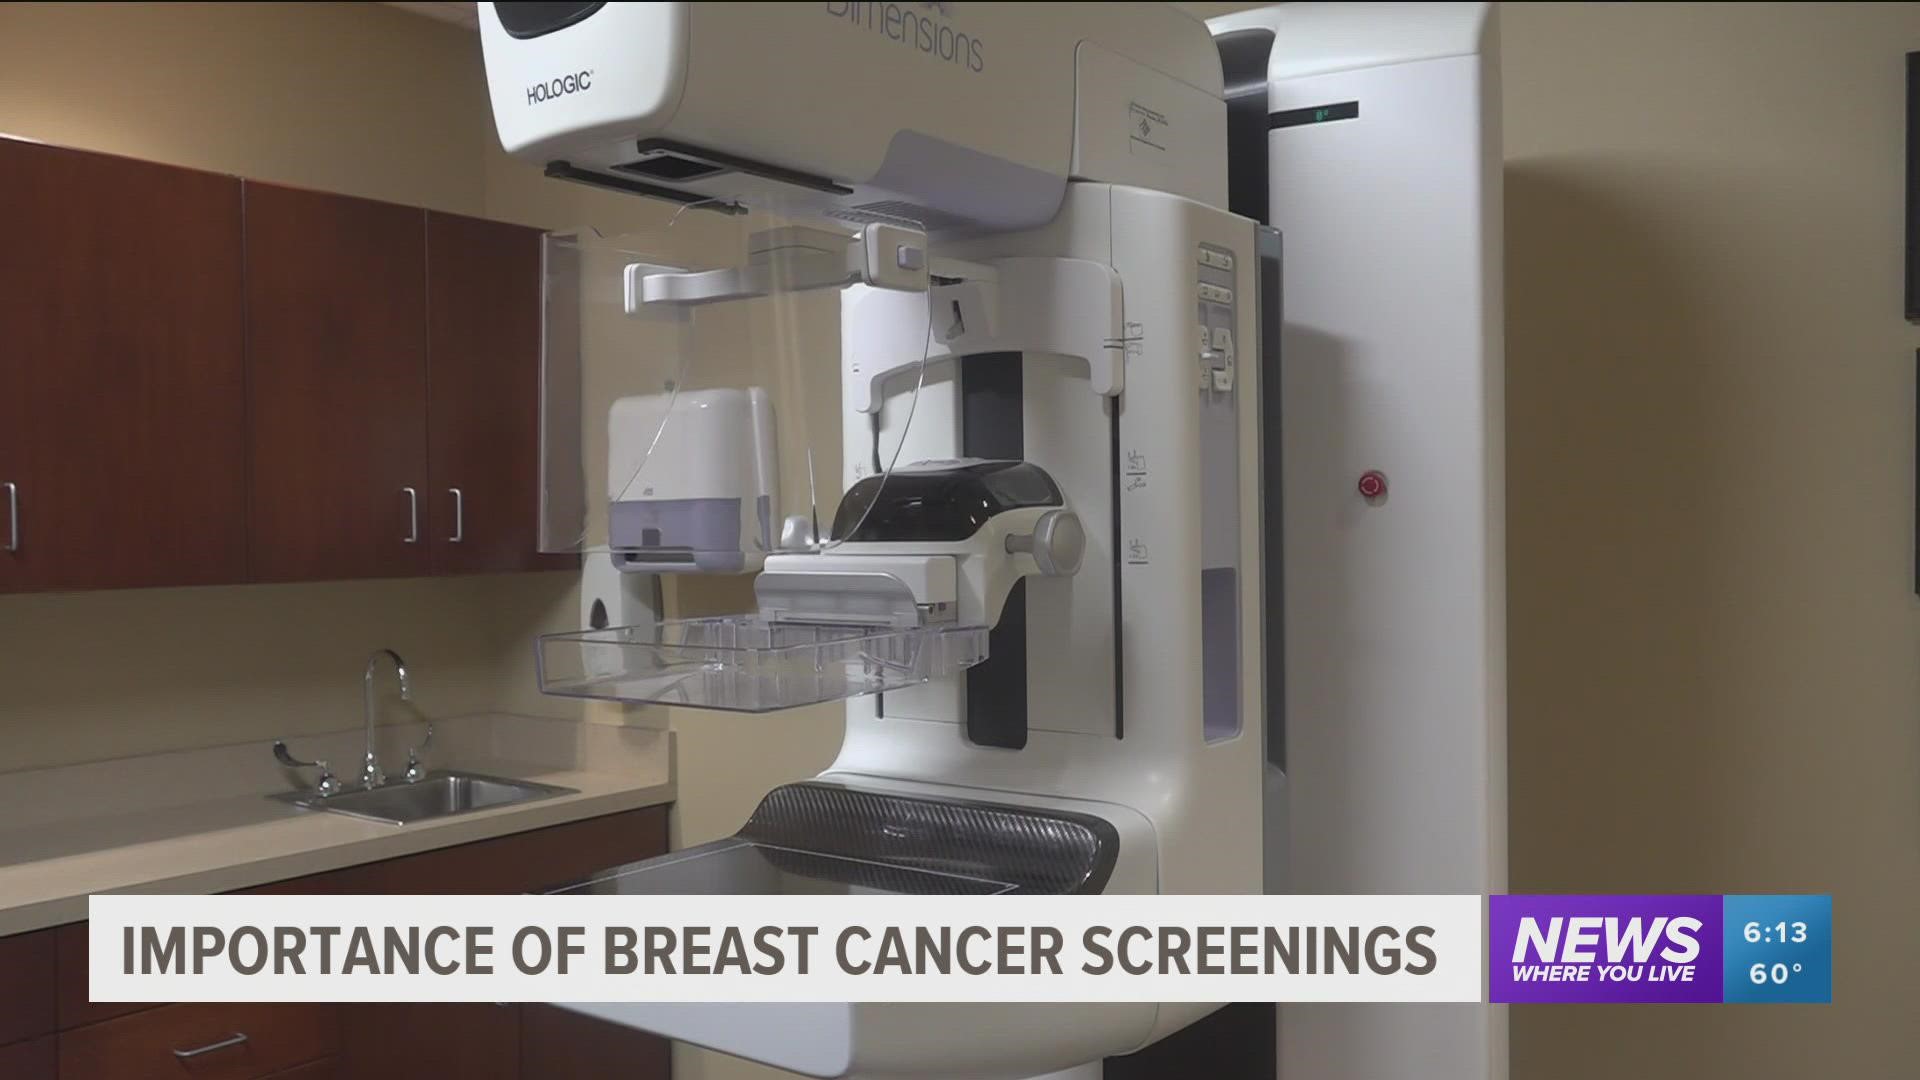 Delayed breast cancer screenings are causing concern for the death toll to increase from the illness.